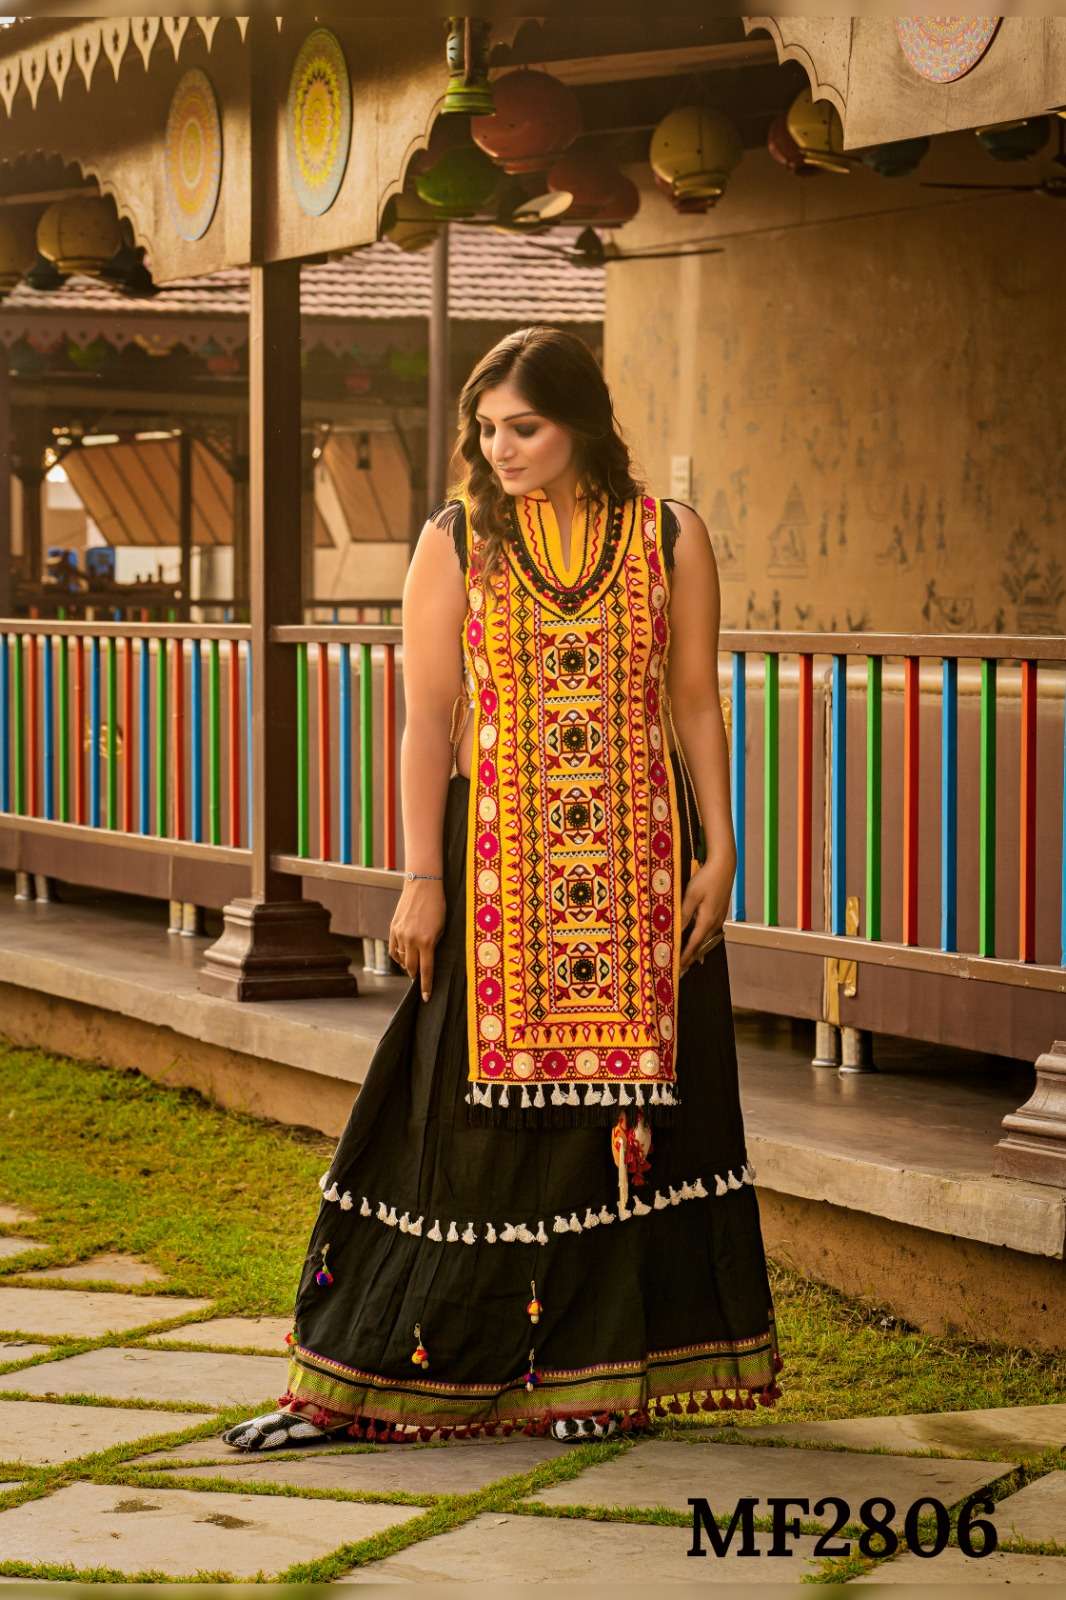 Kurta Set and Kurti Set for Women - What is the Difference?